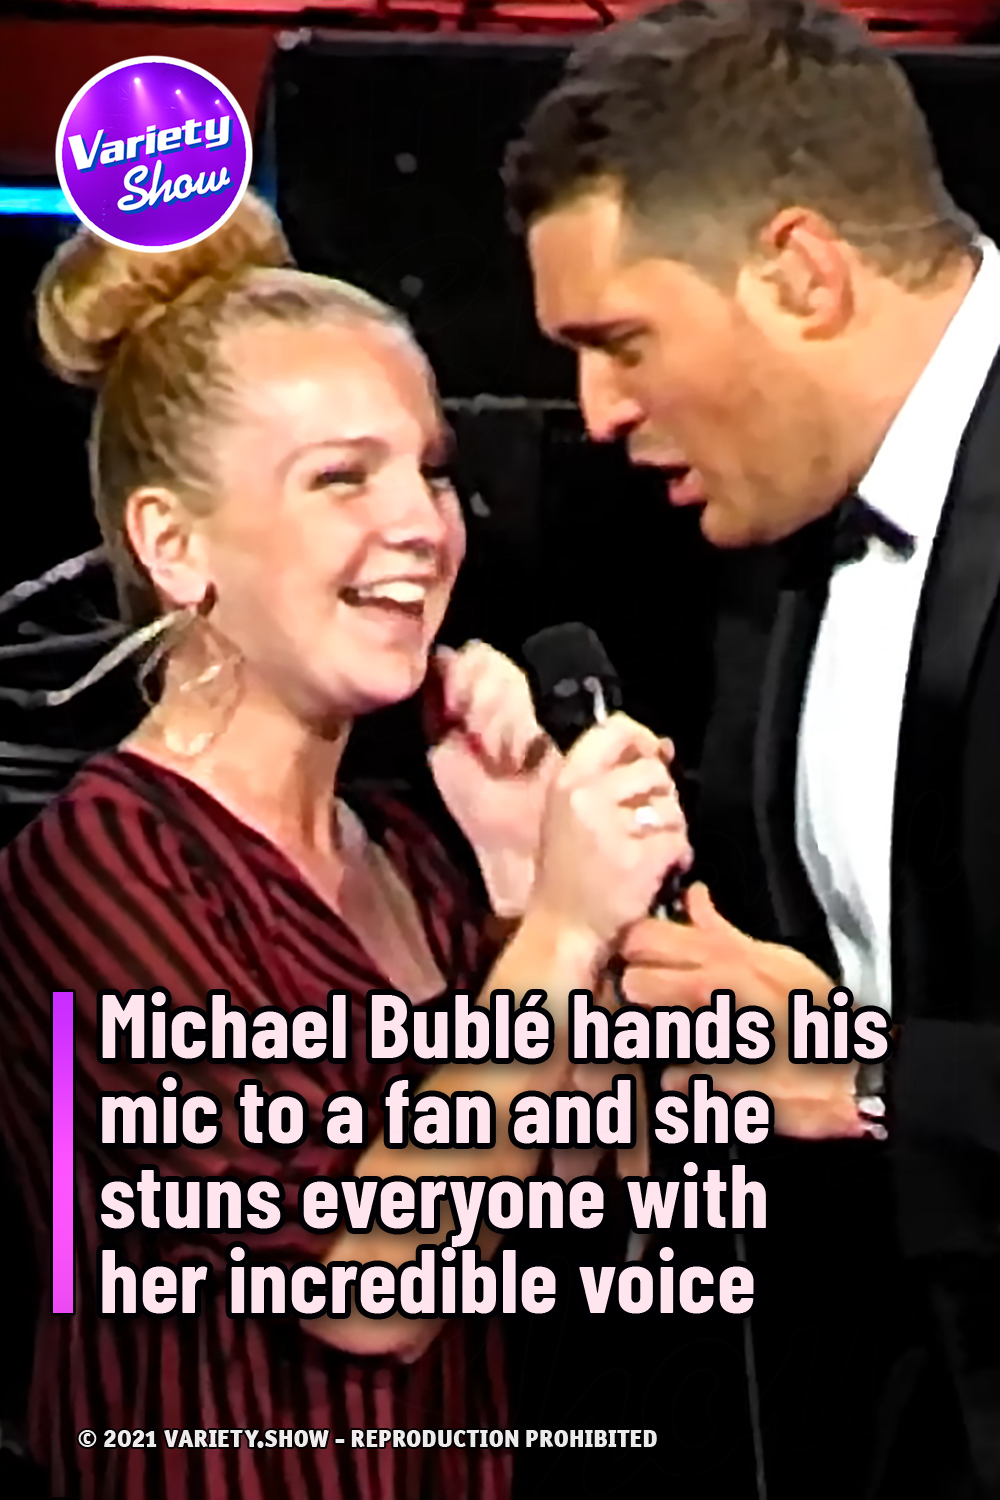 Michael Bublé hands his mic to a fan and she stuns everyone with her incredible voice